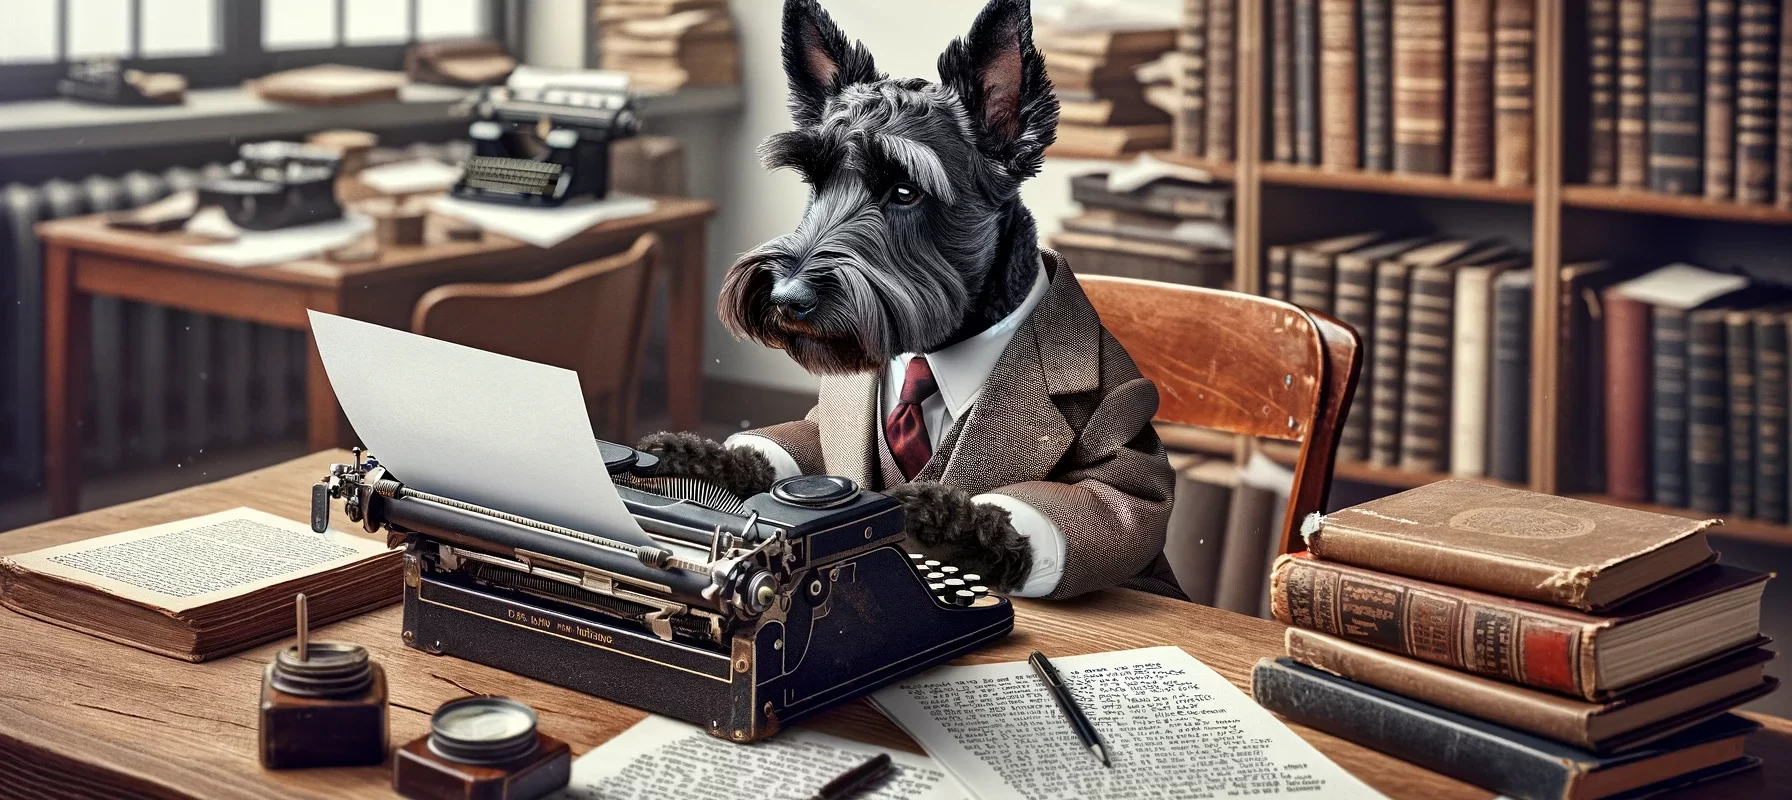 A Scottish Terrier in a suit, typing on a vintage typewriter, surrounded by books and papers, embodying the role of a professional editor in a busy office setting.